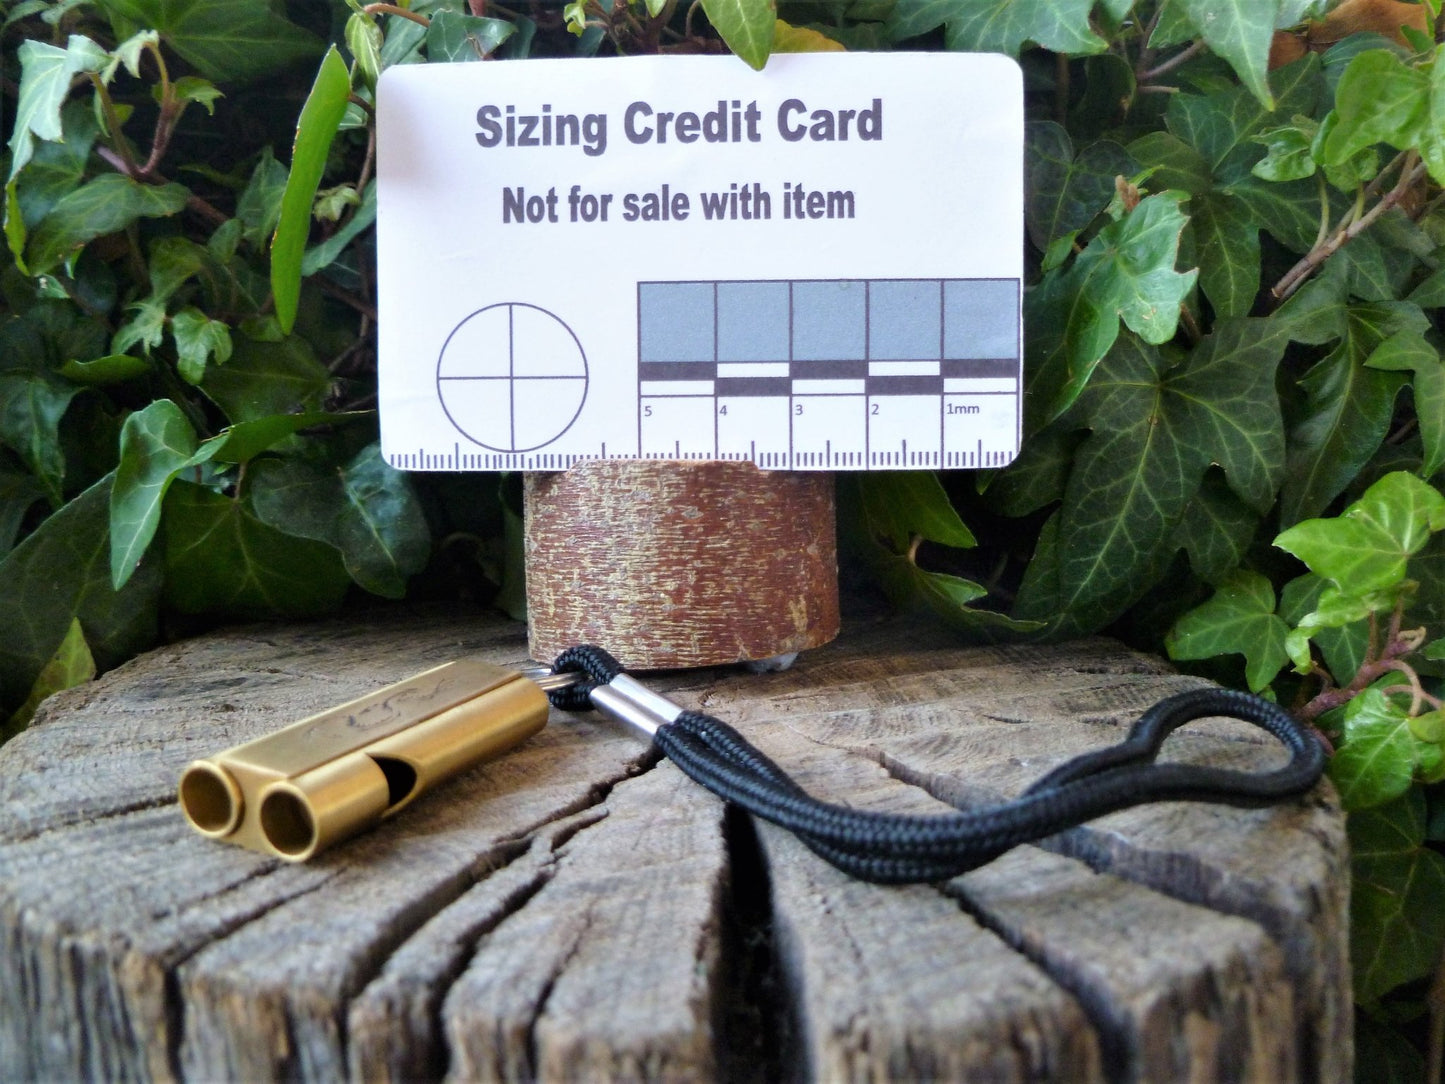 EDC Brass Double Pipe Whistle attach them to your keyring  Huggins Attic    [Huggins attic]